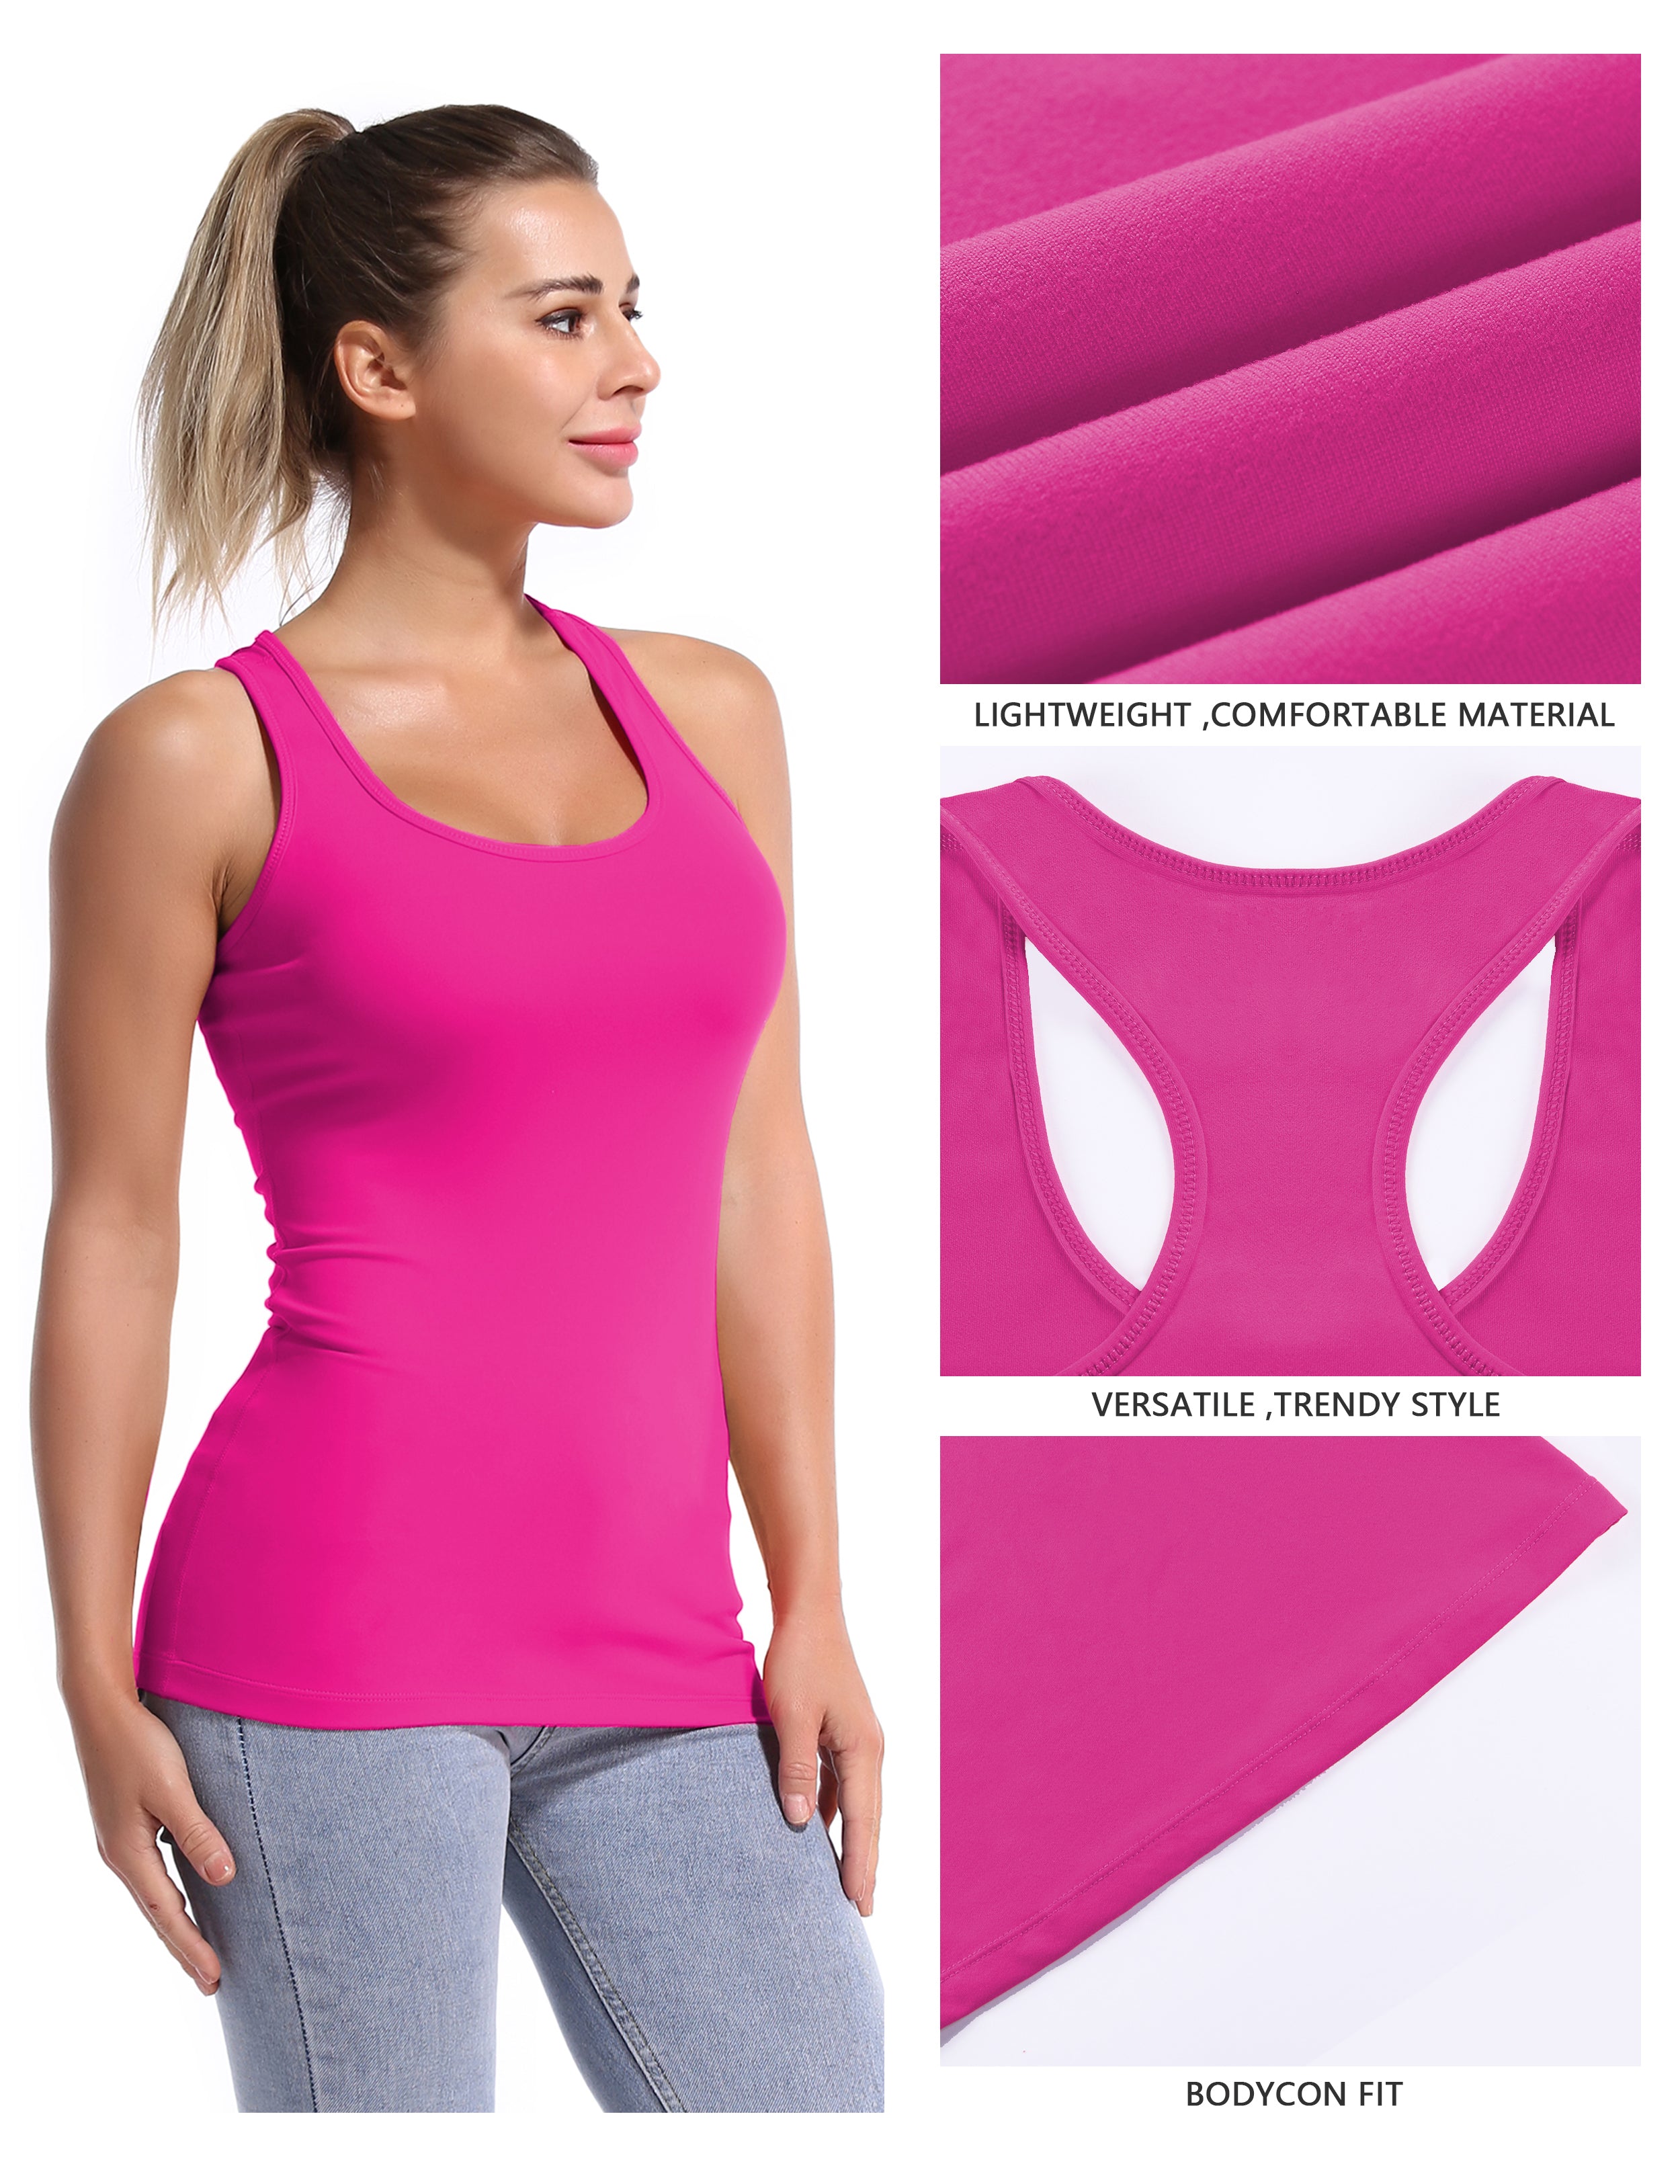 Racerback Athletic Tank Tops magenta 92%Nylon/8%Spandex(Cotton Soft) Designed for Golf Tight Fit So buttery soft, it feels weightless Sweat-wicking Four-way stretch Breathable Contours your body Sits below the waistband for moderate, everyday coverage